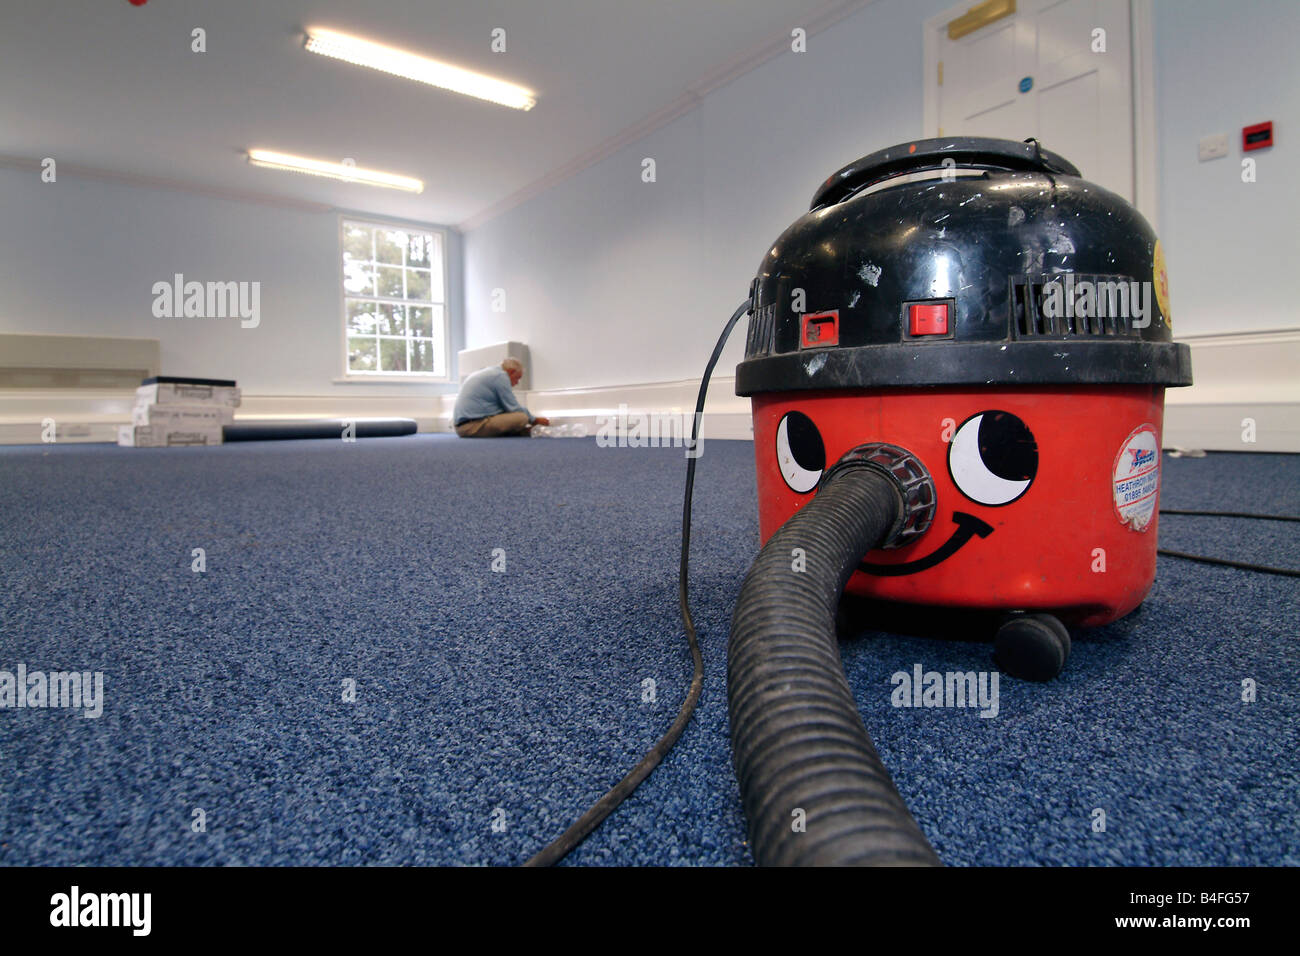 'Henry' vacuum cleaner waiting to be used by a carpet fitter in a newly refurbished office premises Stock Photo